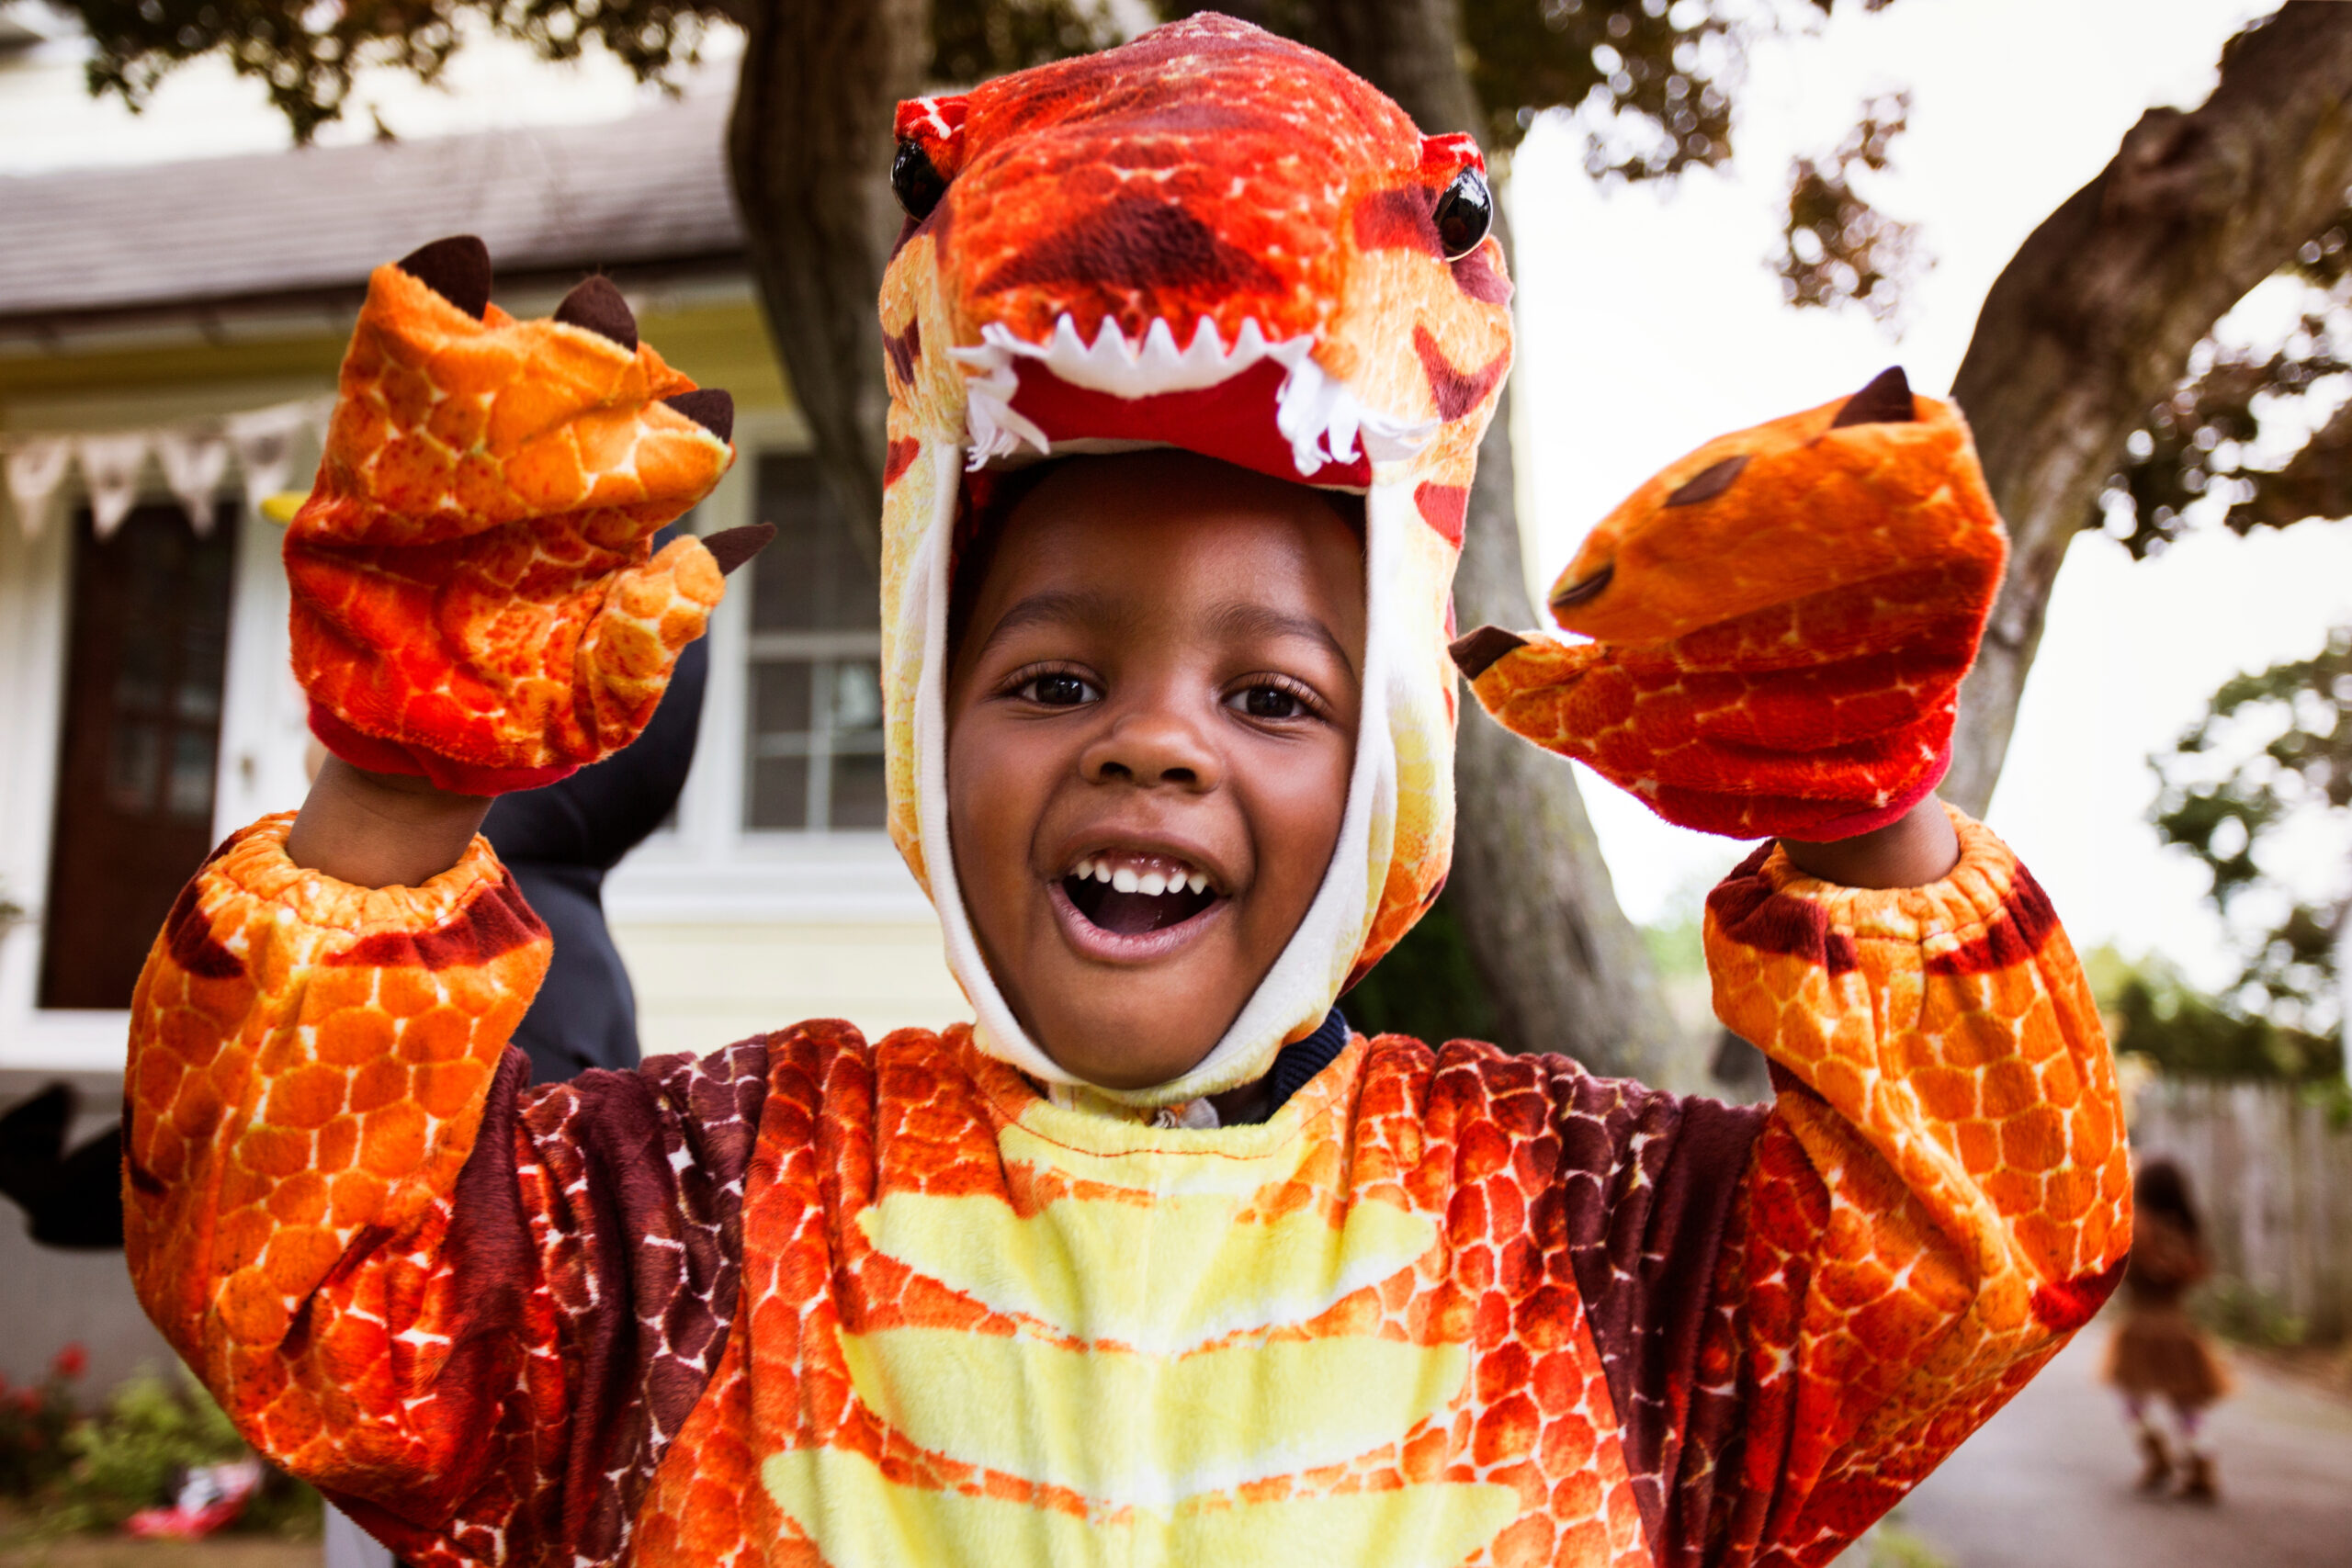 13 Ways to Add Halloween Fun to Brushing and Flossing